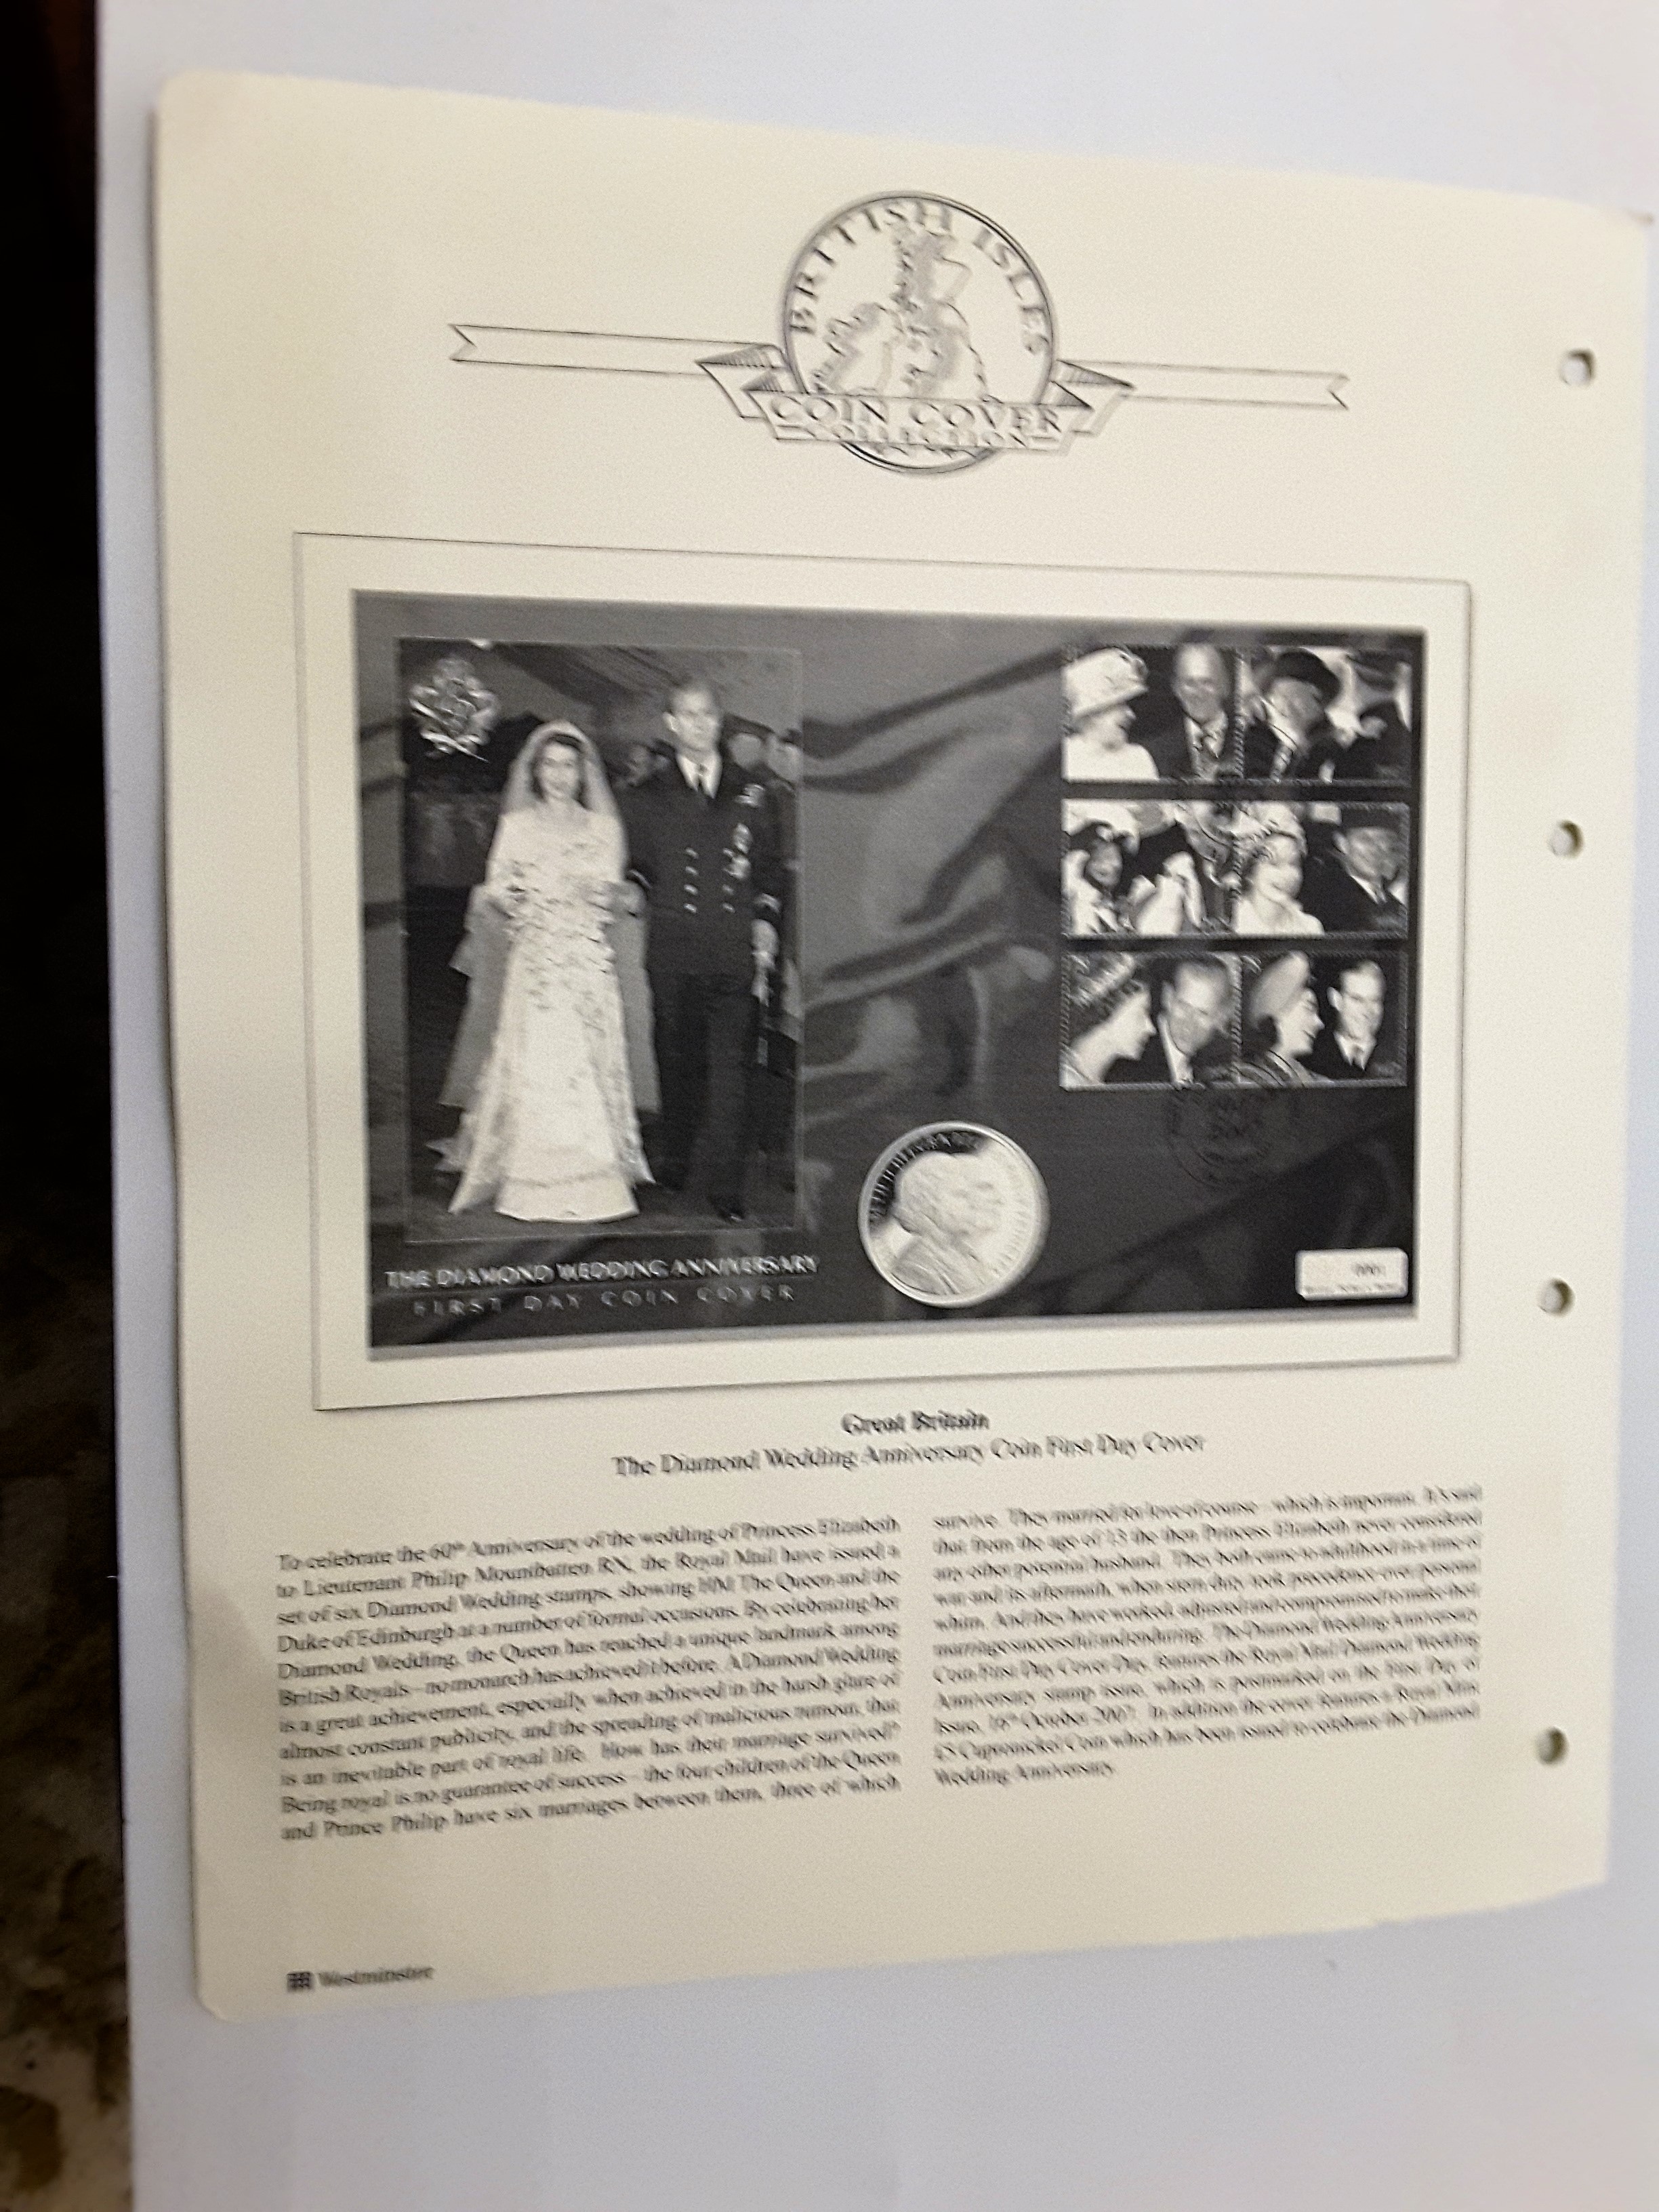 GB COIN FIRST DAY COVER - THE DIAMOND WEDDING ANNIVERSARY OF QUEEN ELIZABETH - Image 2 of 4